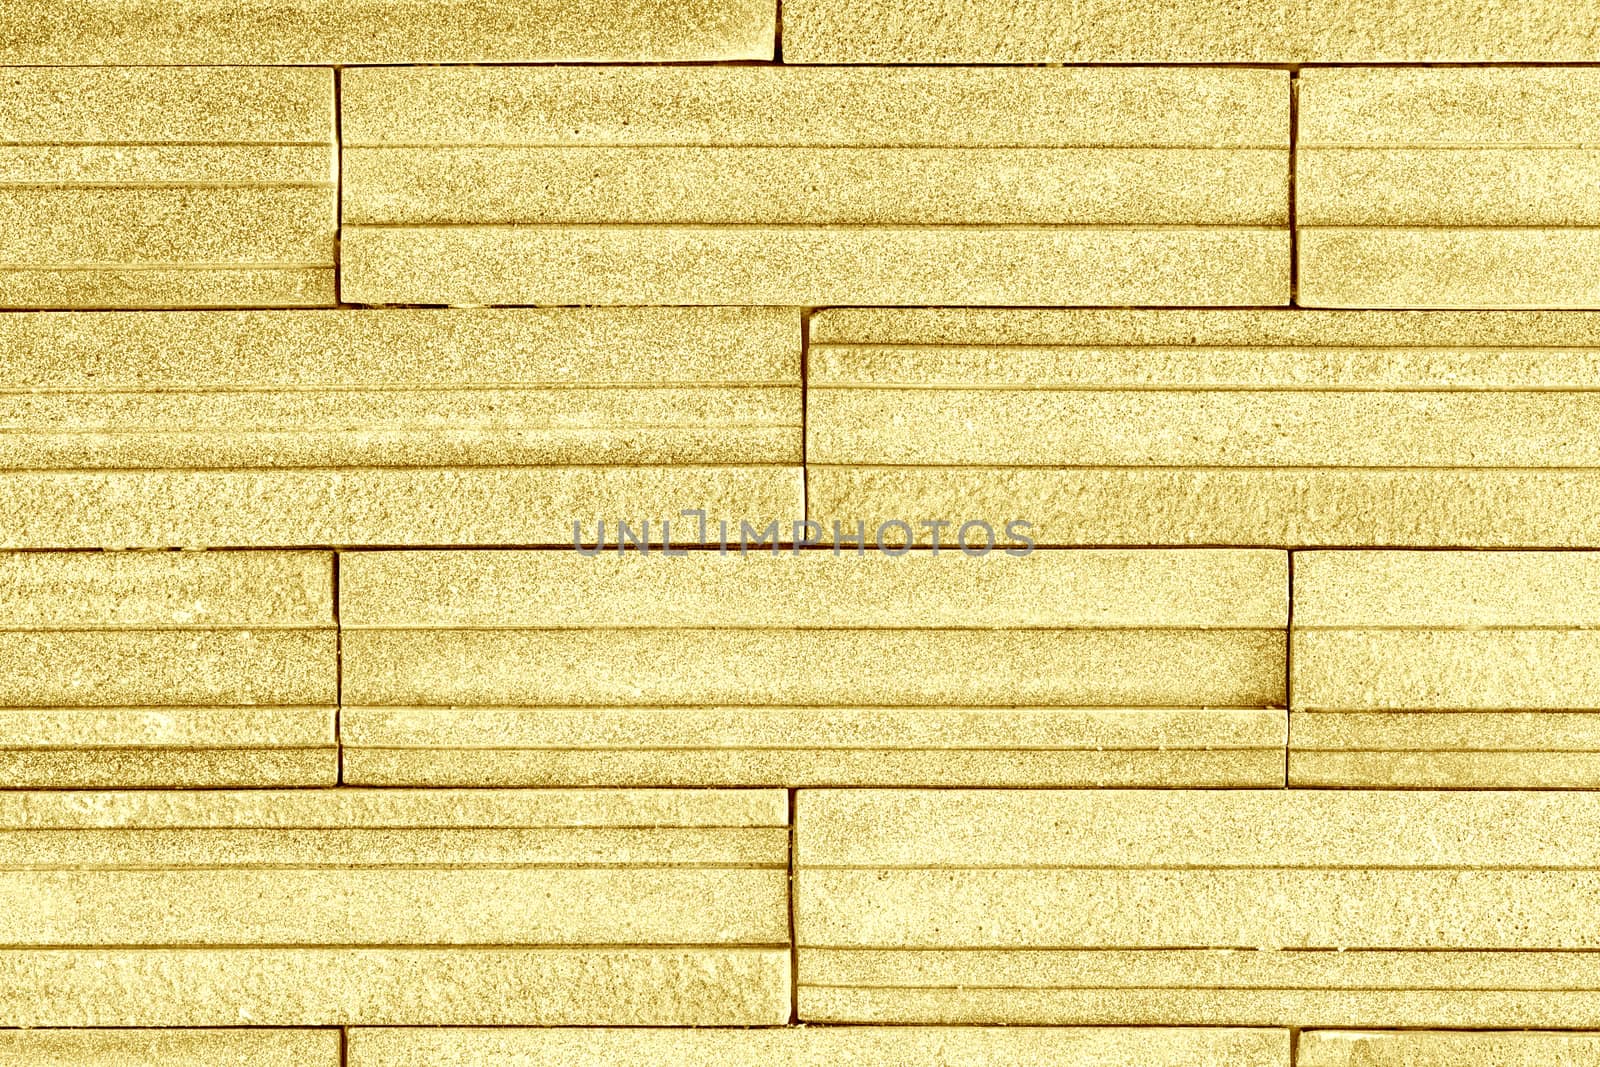 Wall blick gold cements background. by jayzynism